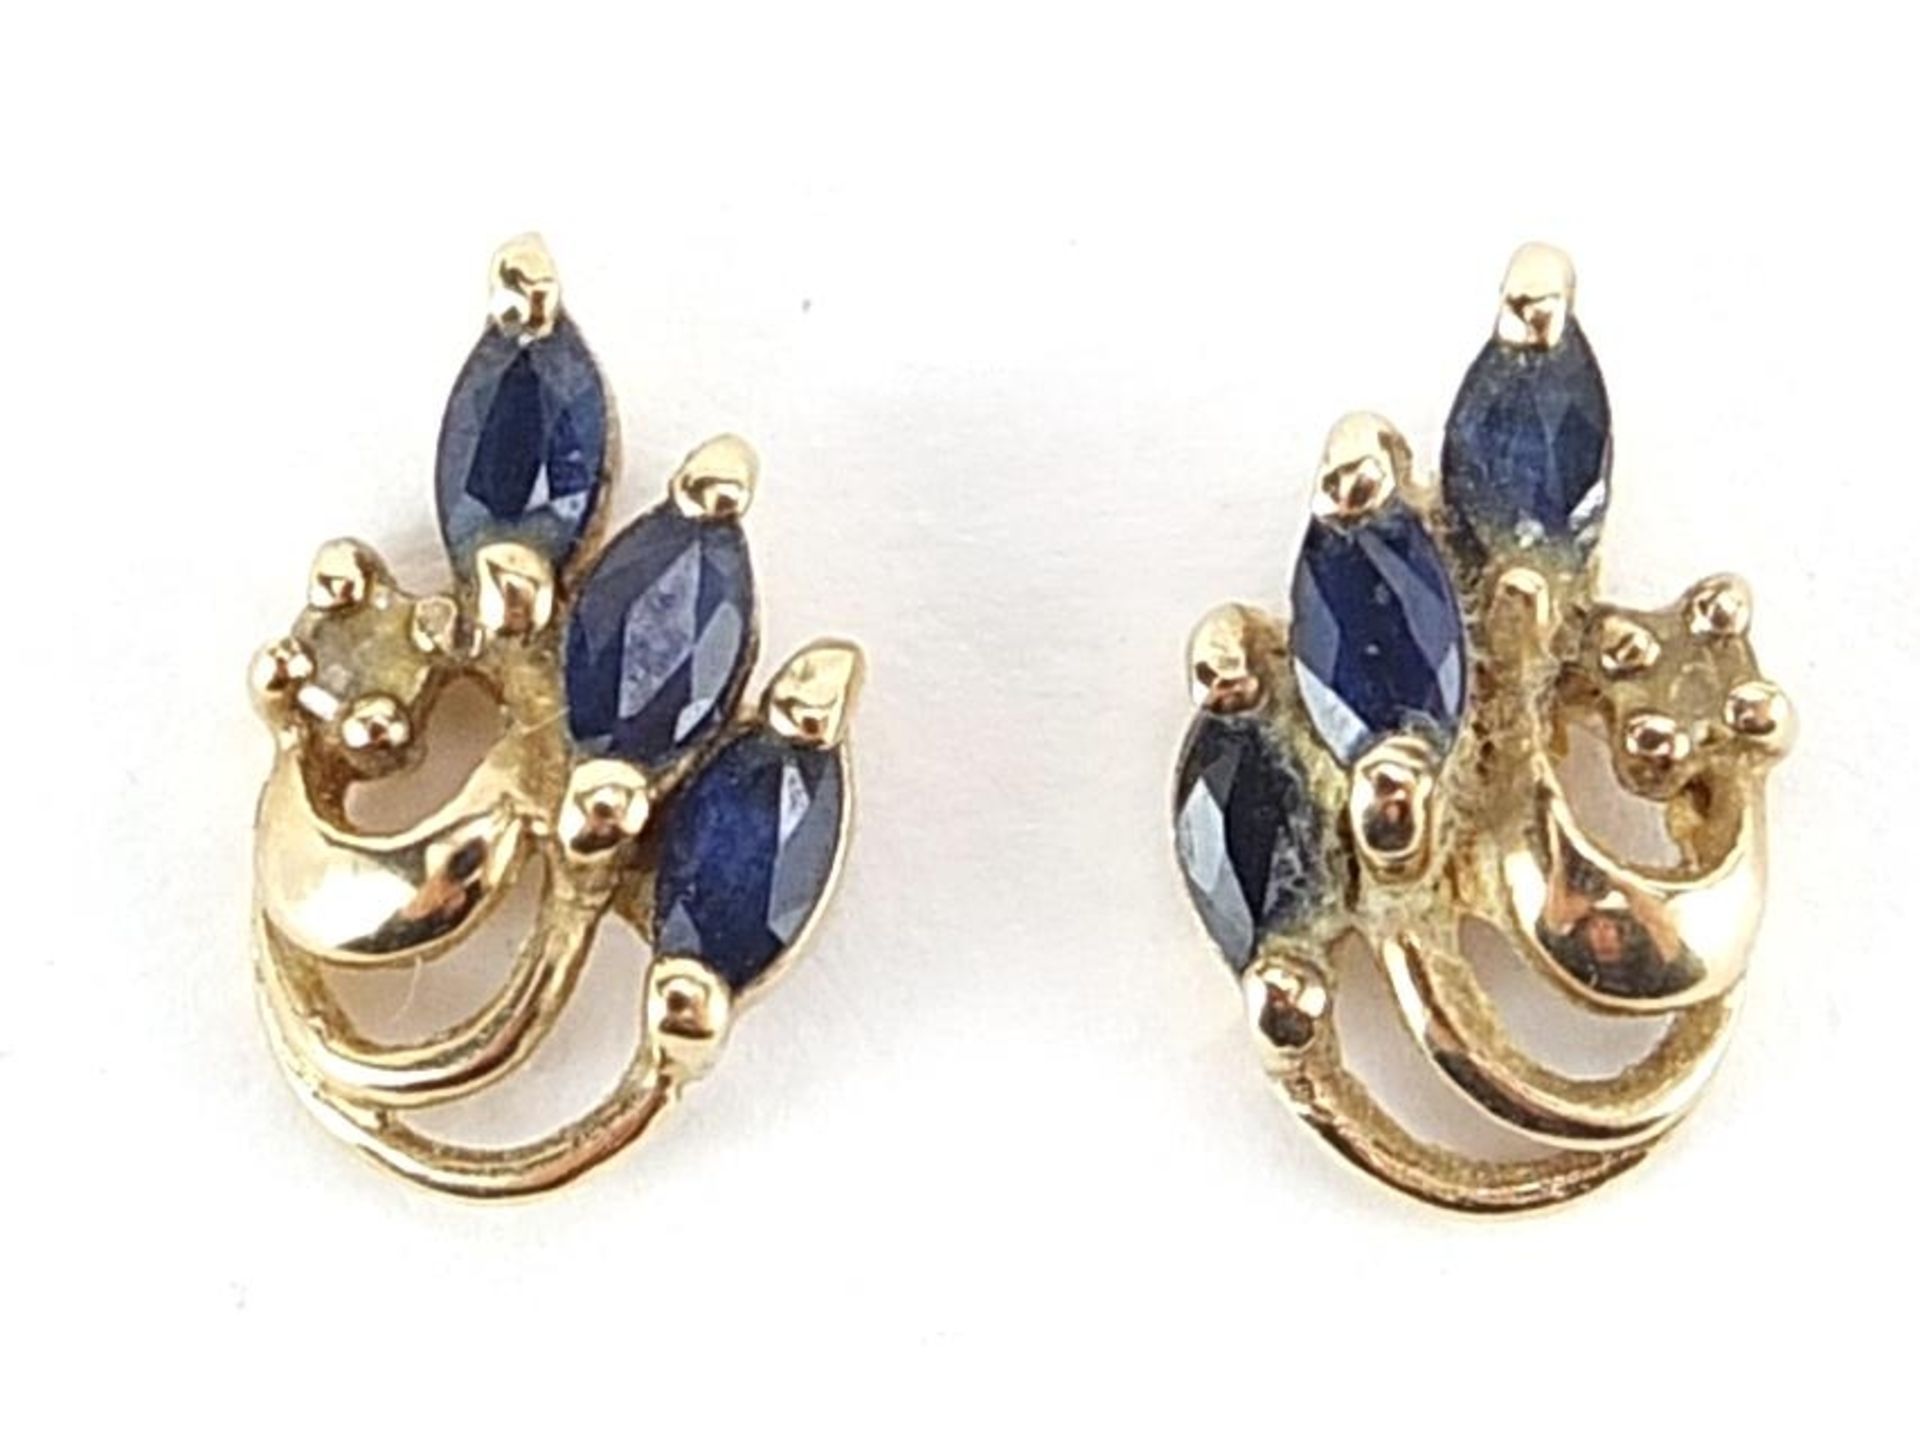 Pair of 9ct gold blue and white sapphire stud earrings housed in a Showerings Taunton box, 1.2cm